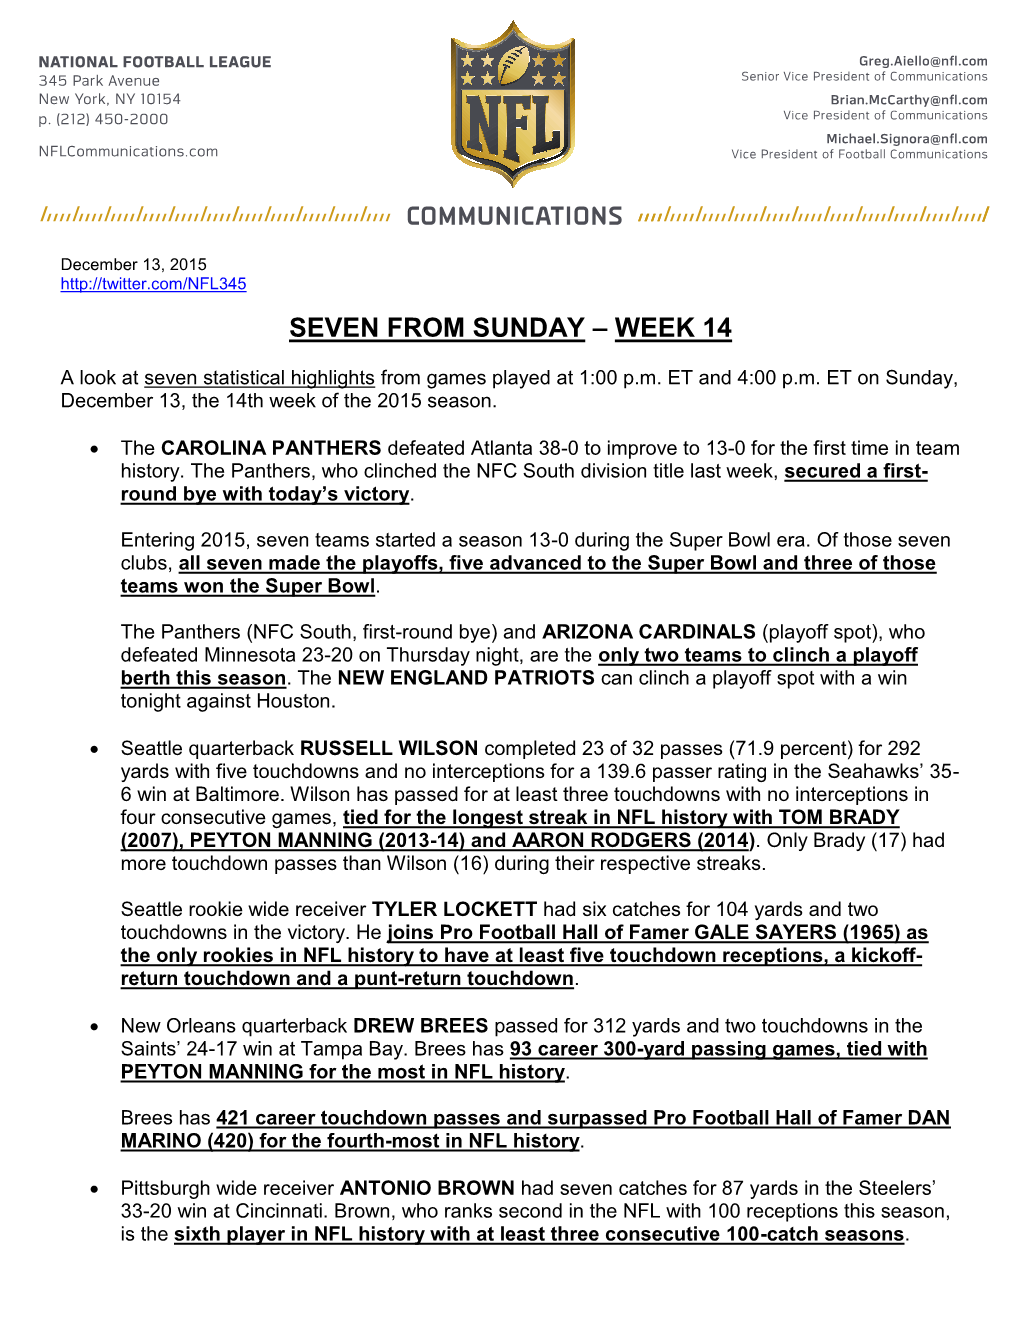 Seven from Sunday – Week 14